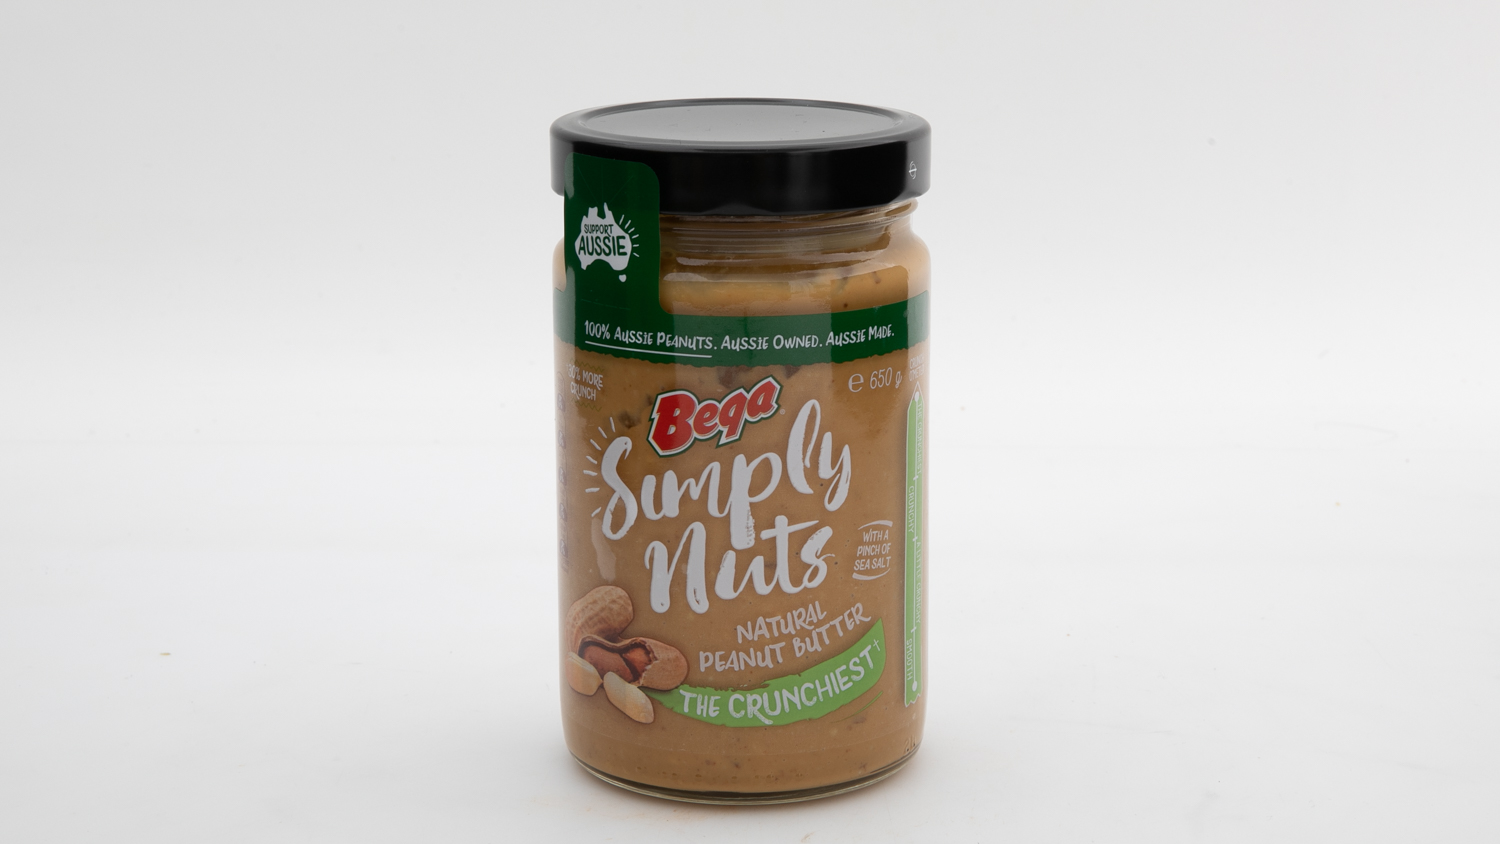 Bega Simply Nuts Natural Peanut Butter The Crunchiest carousel image